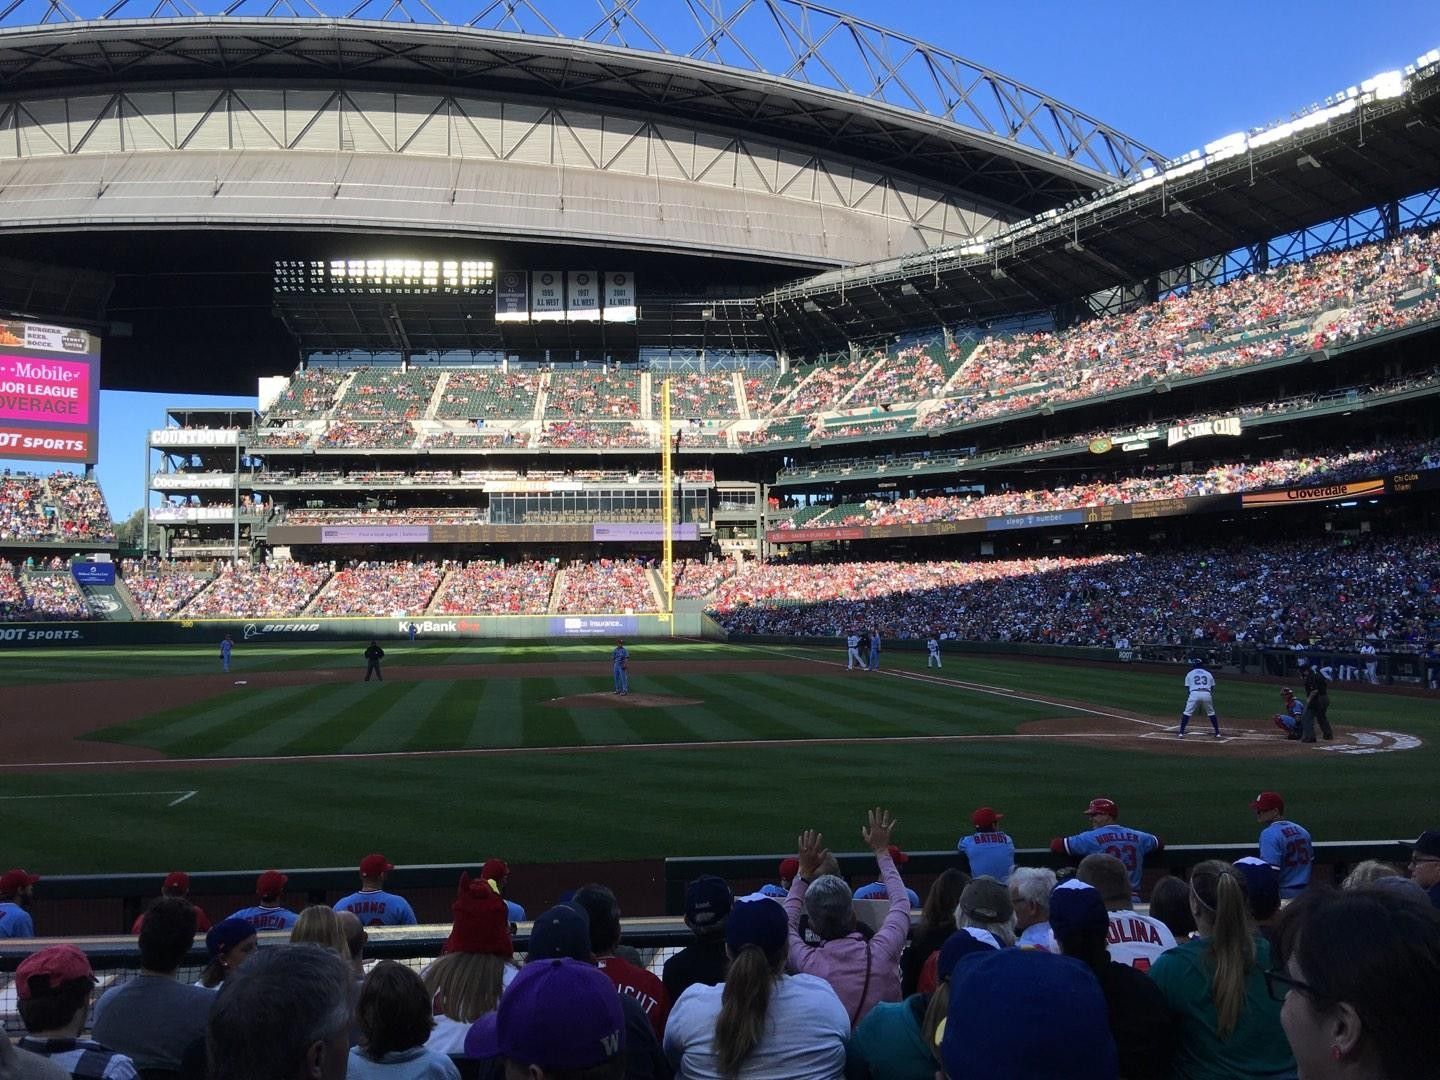 Mariners v Yankees, Aug 26, Premier Seats with VIP Parking